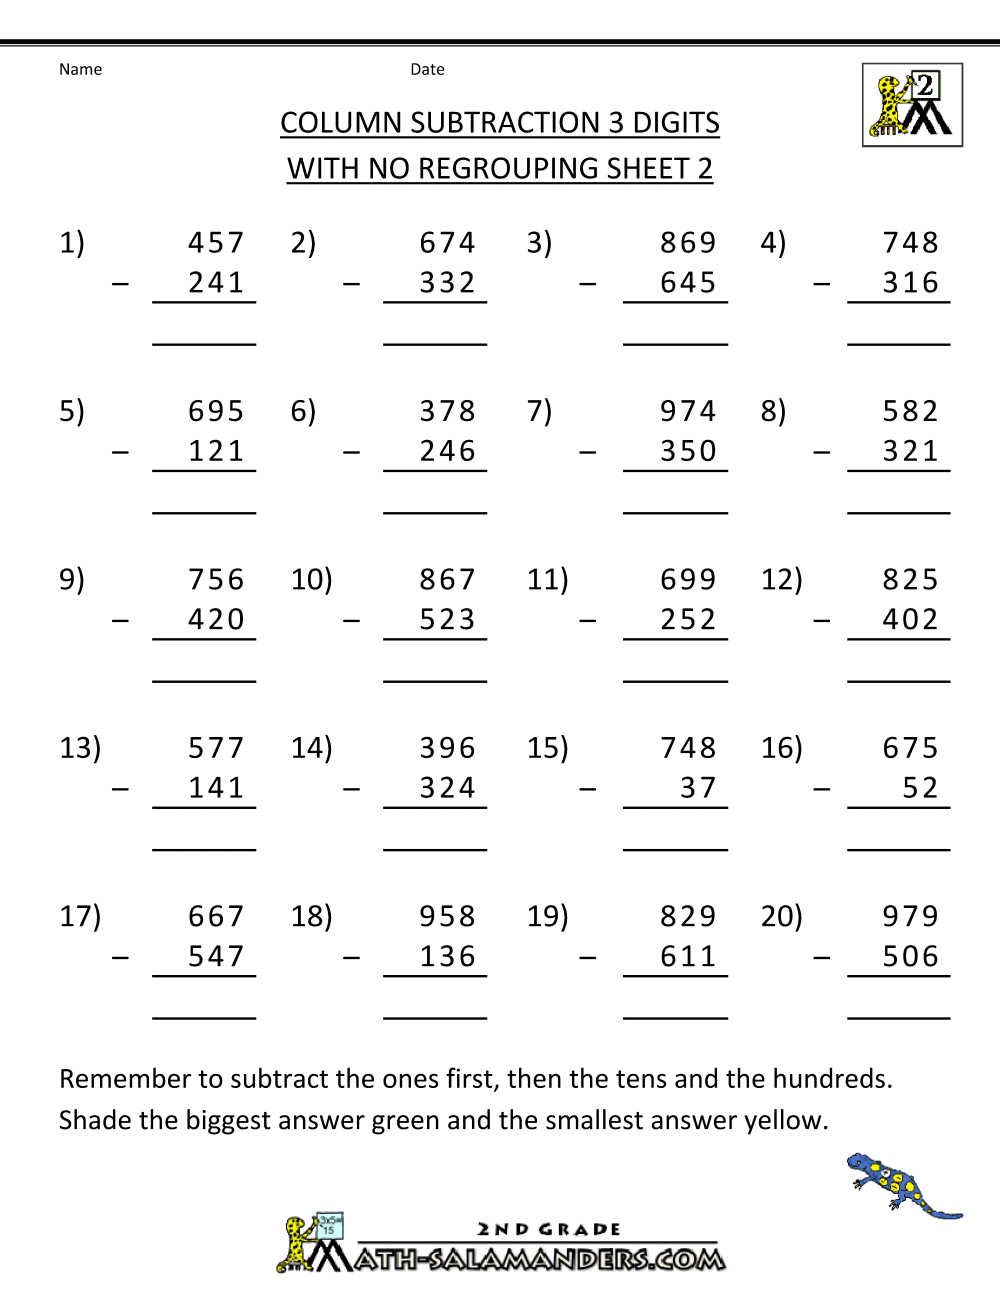 Regrouping 2 2 Column missing 2 No year Digit number Subtraction  Answers worksheets Sheet